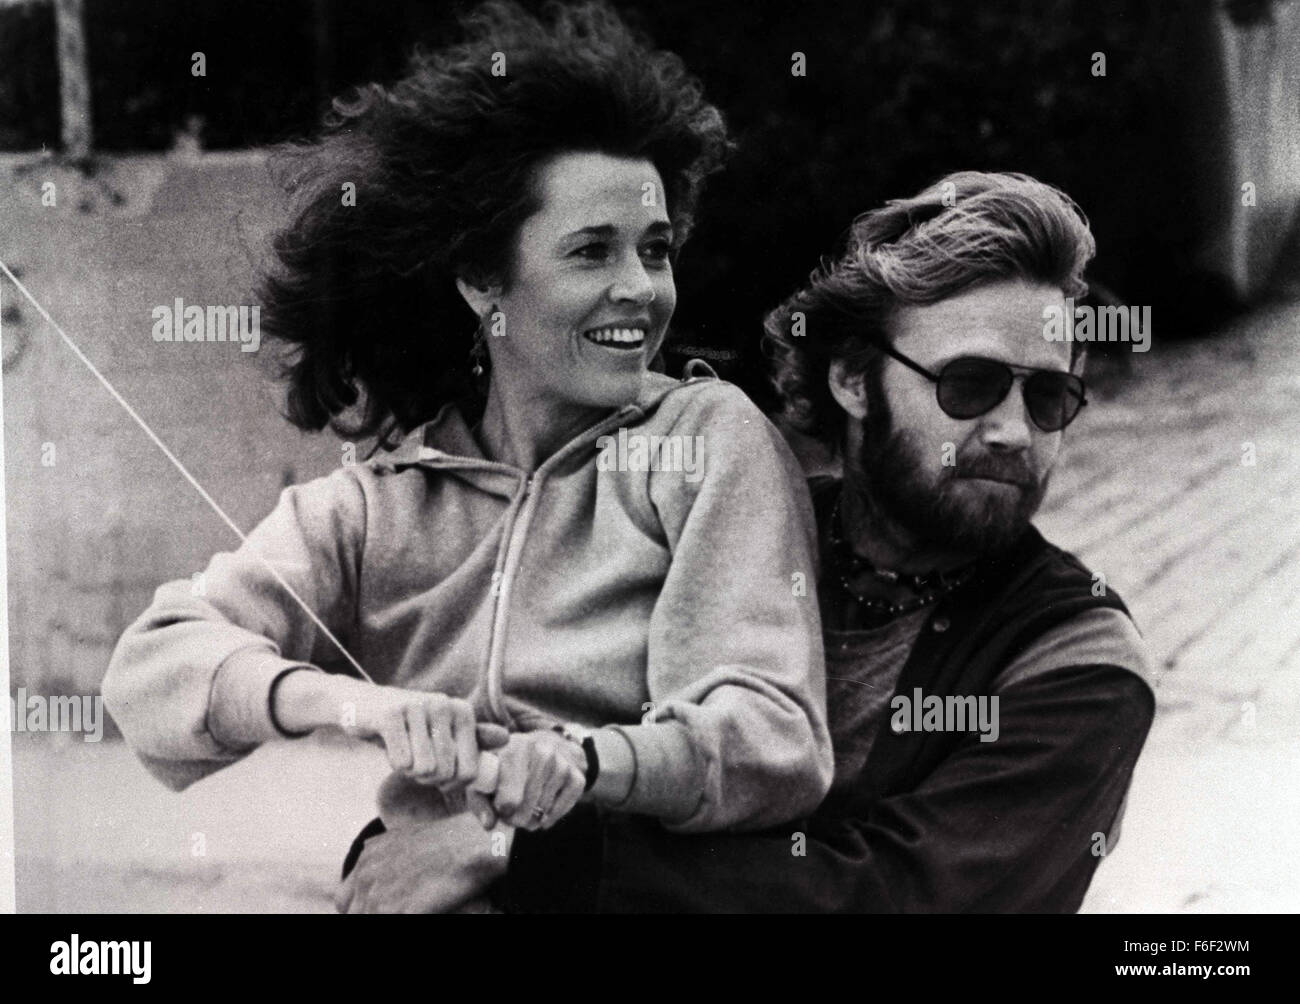 Mar 01, 1978; Hollywood, CA, UK; JON VOIGHT and JANE FONDA - American actors.  In a scene from their film 'Coming Home'. Stock Photo